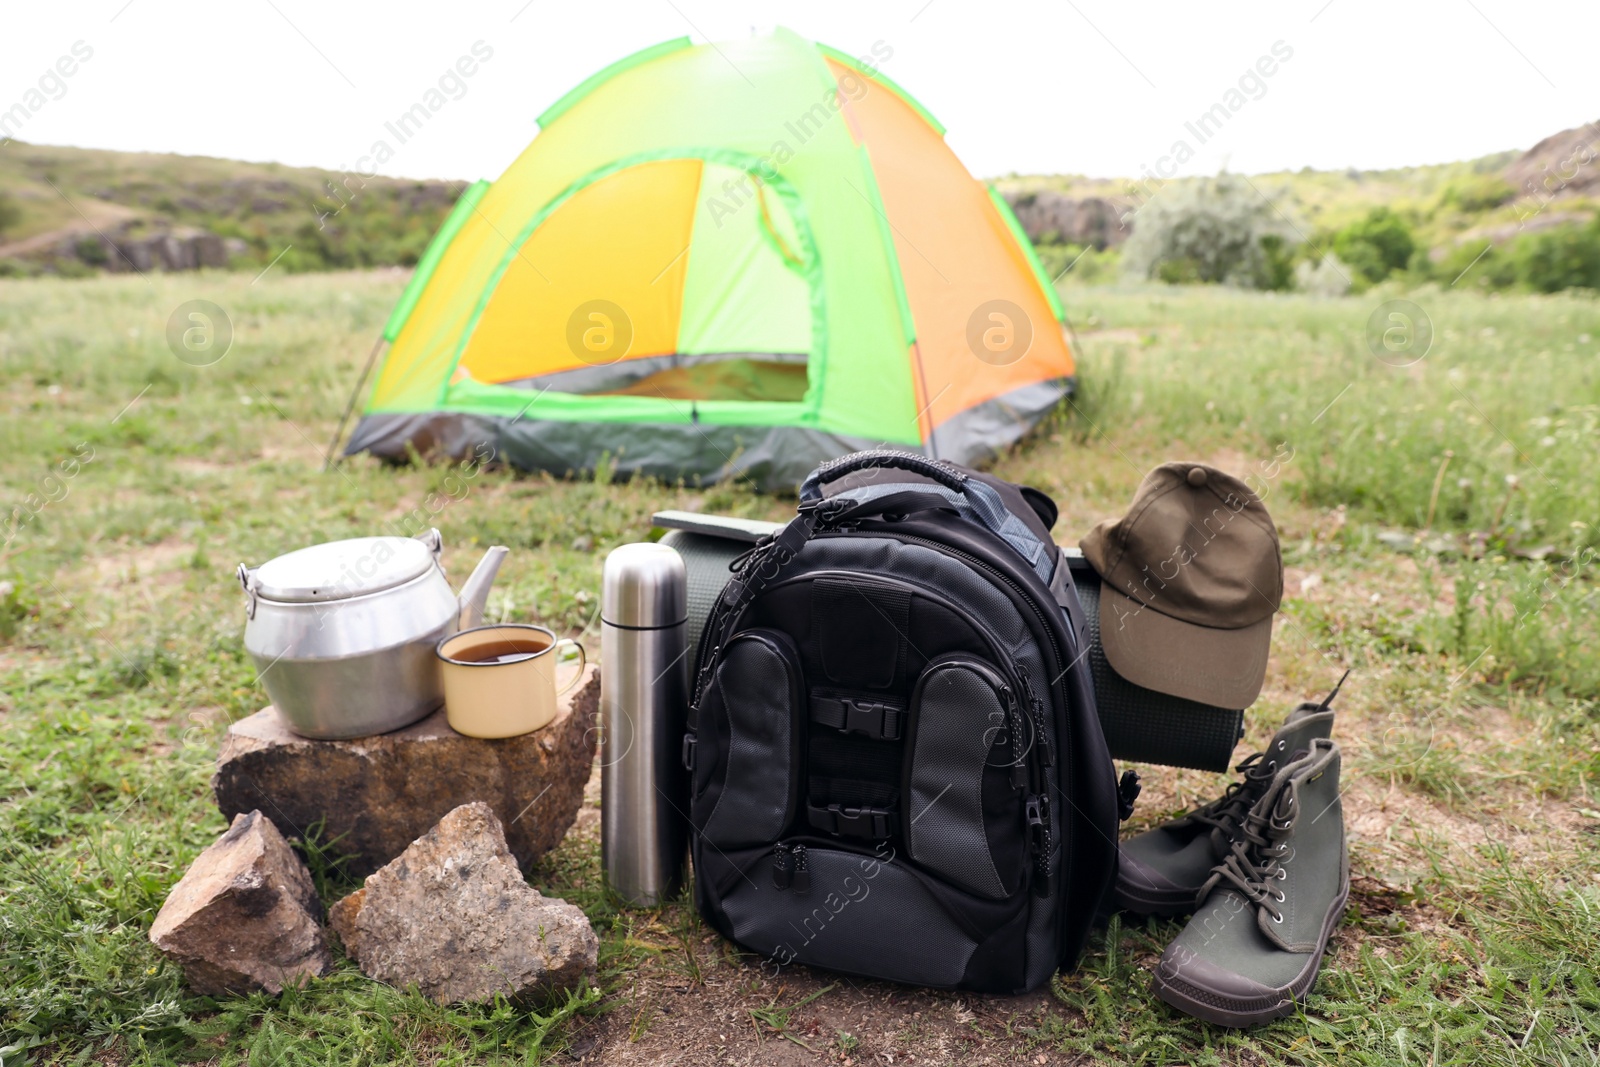 Photo of Camping gear and tourist tent in wilderness